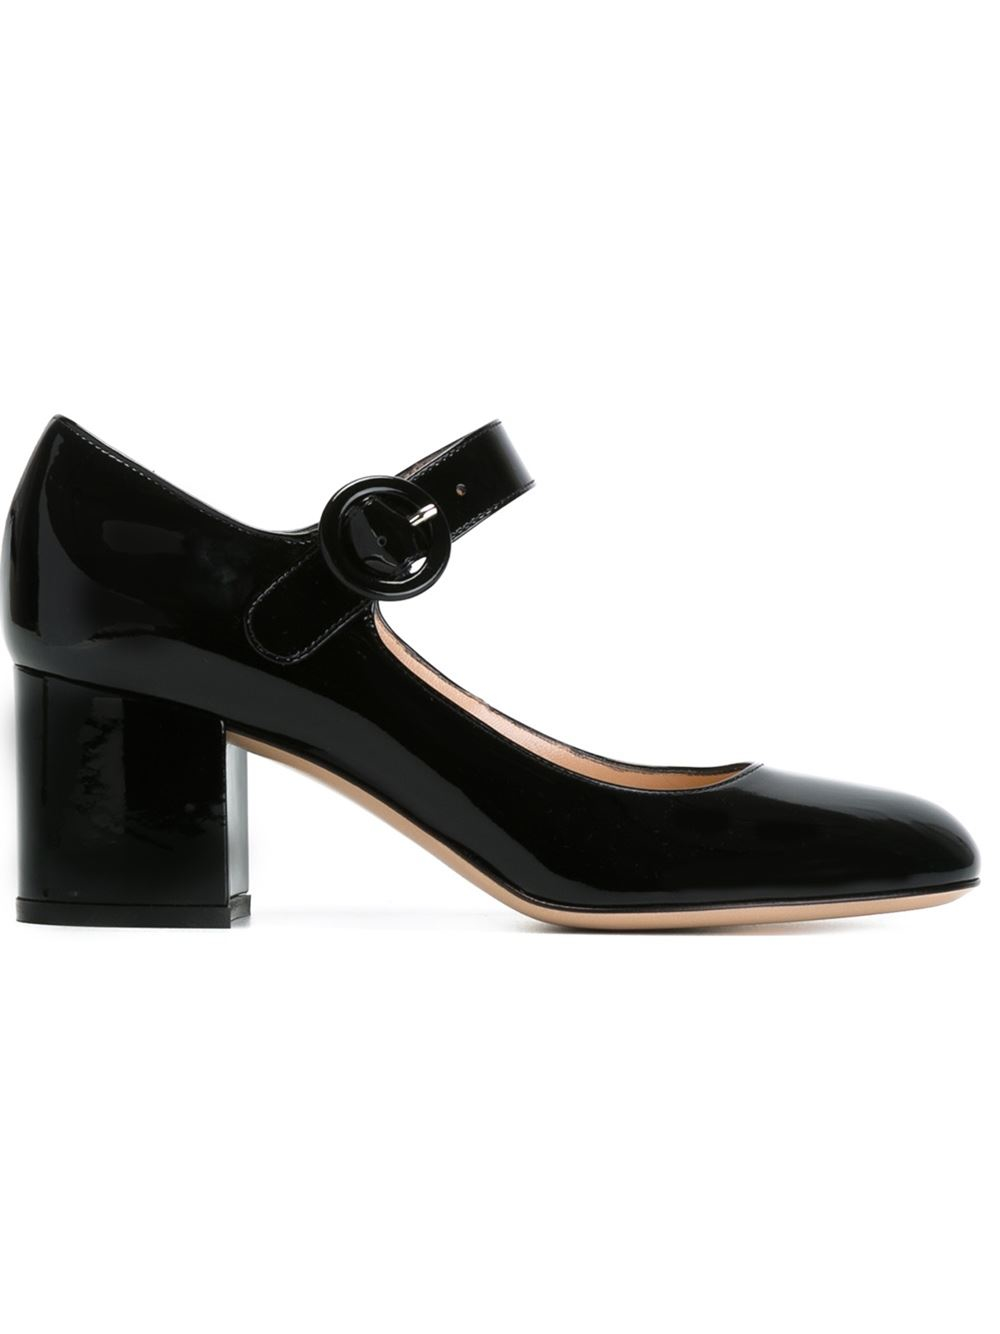 Lyst - Gianvito Rossi Mary Jane Pumps in Black